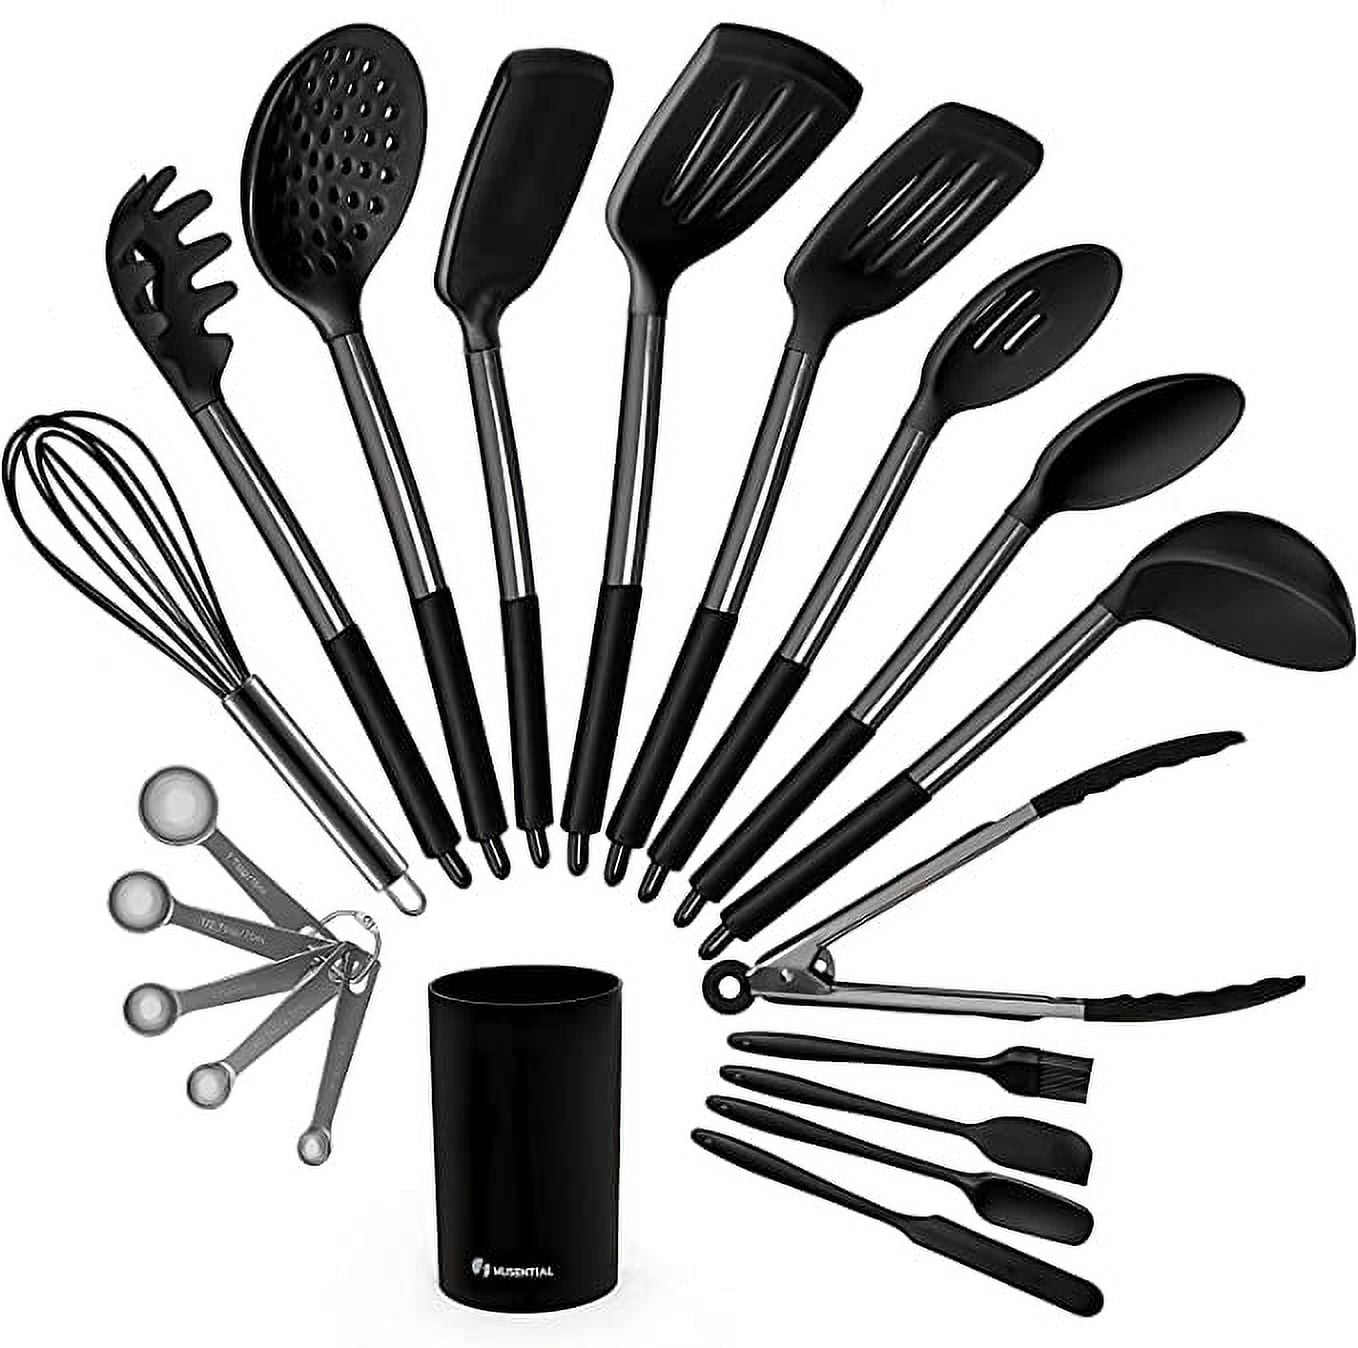 Red Kitchen Utensils Set of 20, P&P CHEF Silicone Cooking Utensil with  Stainless Steel Handle, Non-s…See more Red Kitchen Utensils Set of 20, P&P  CHEF